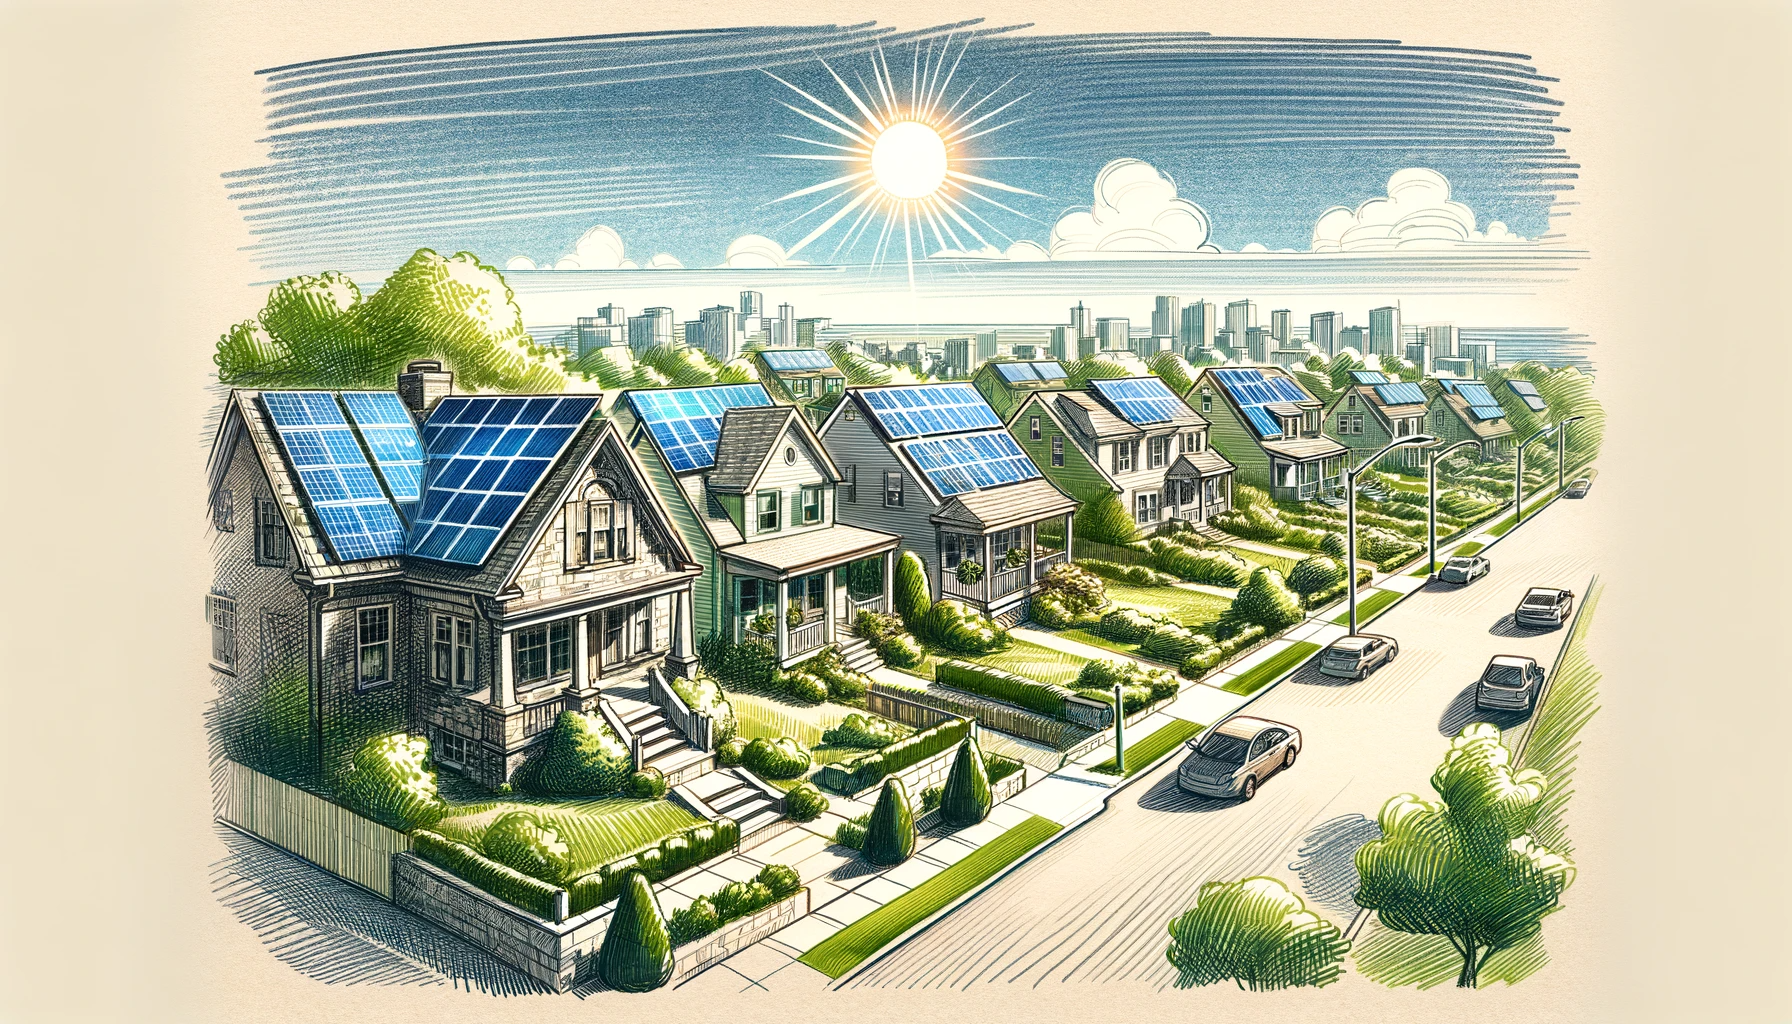 New Jersey Solar Homes sketch